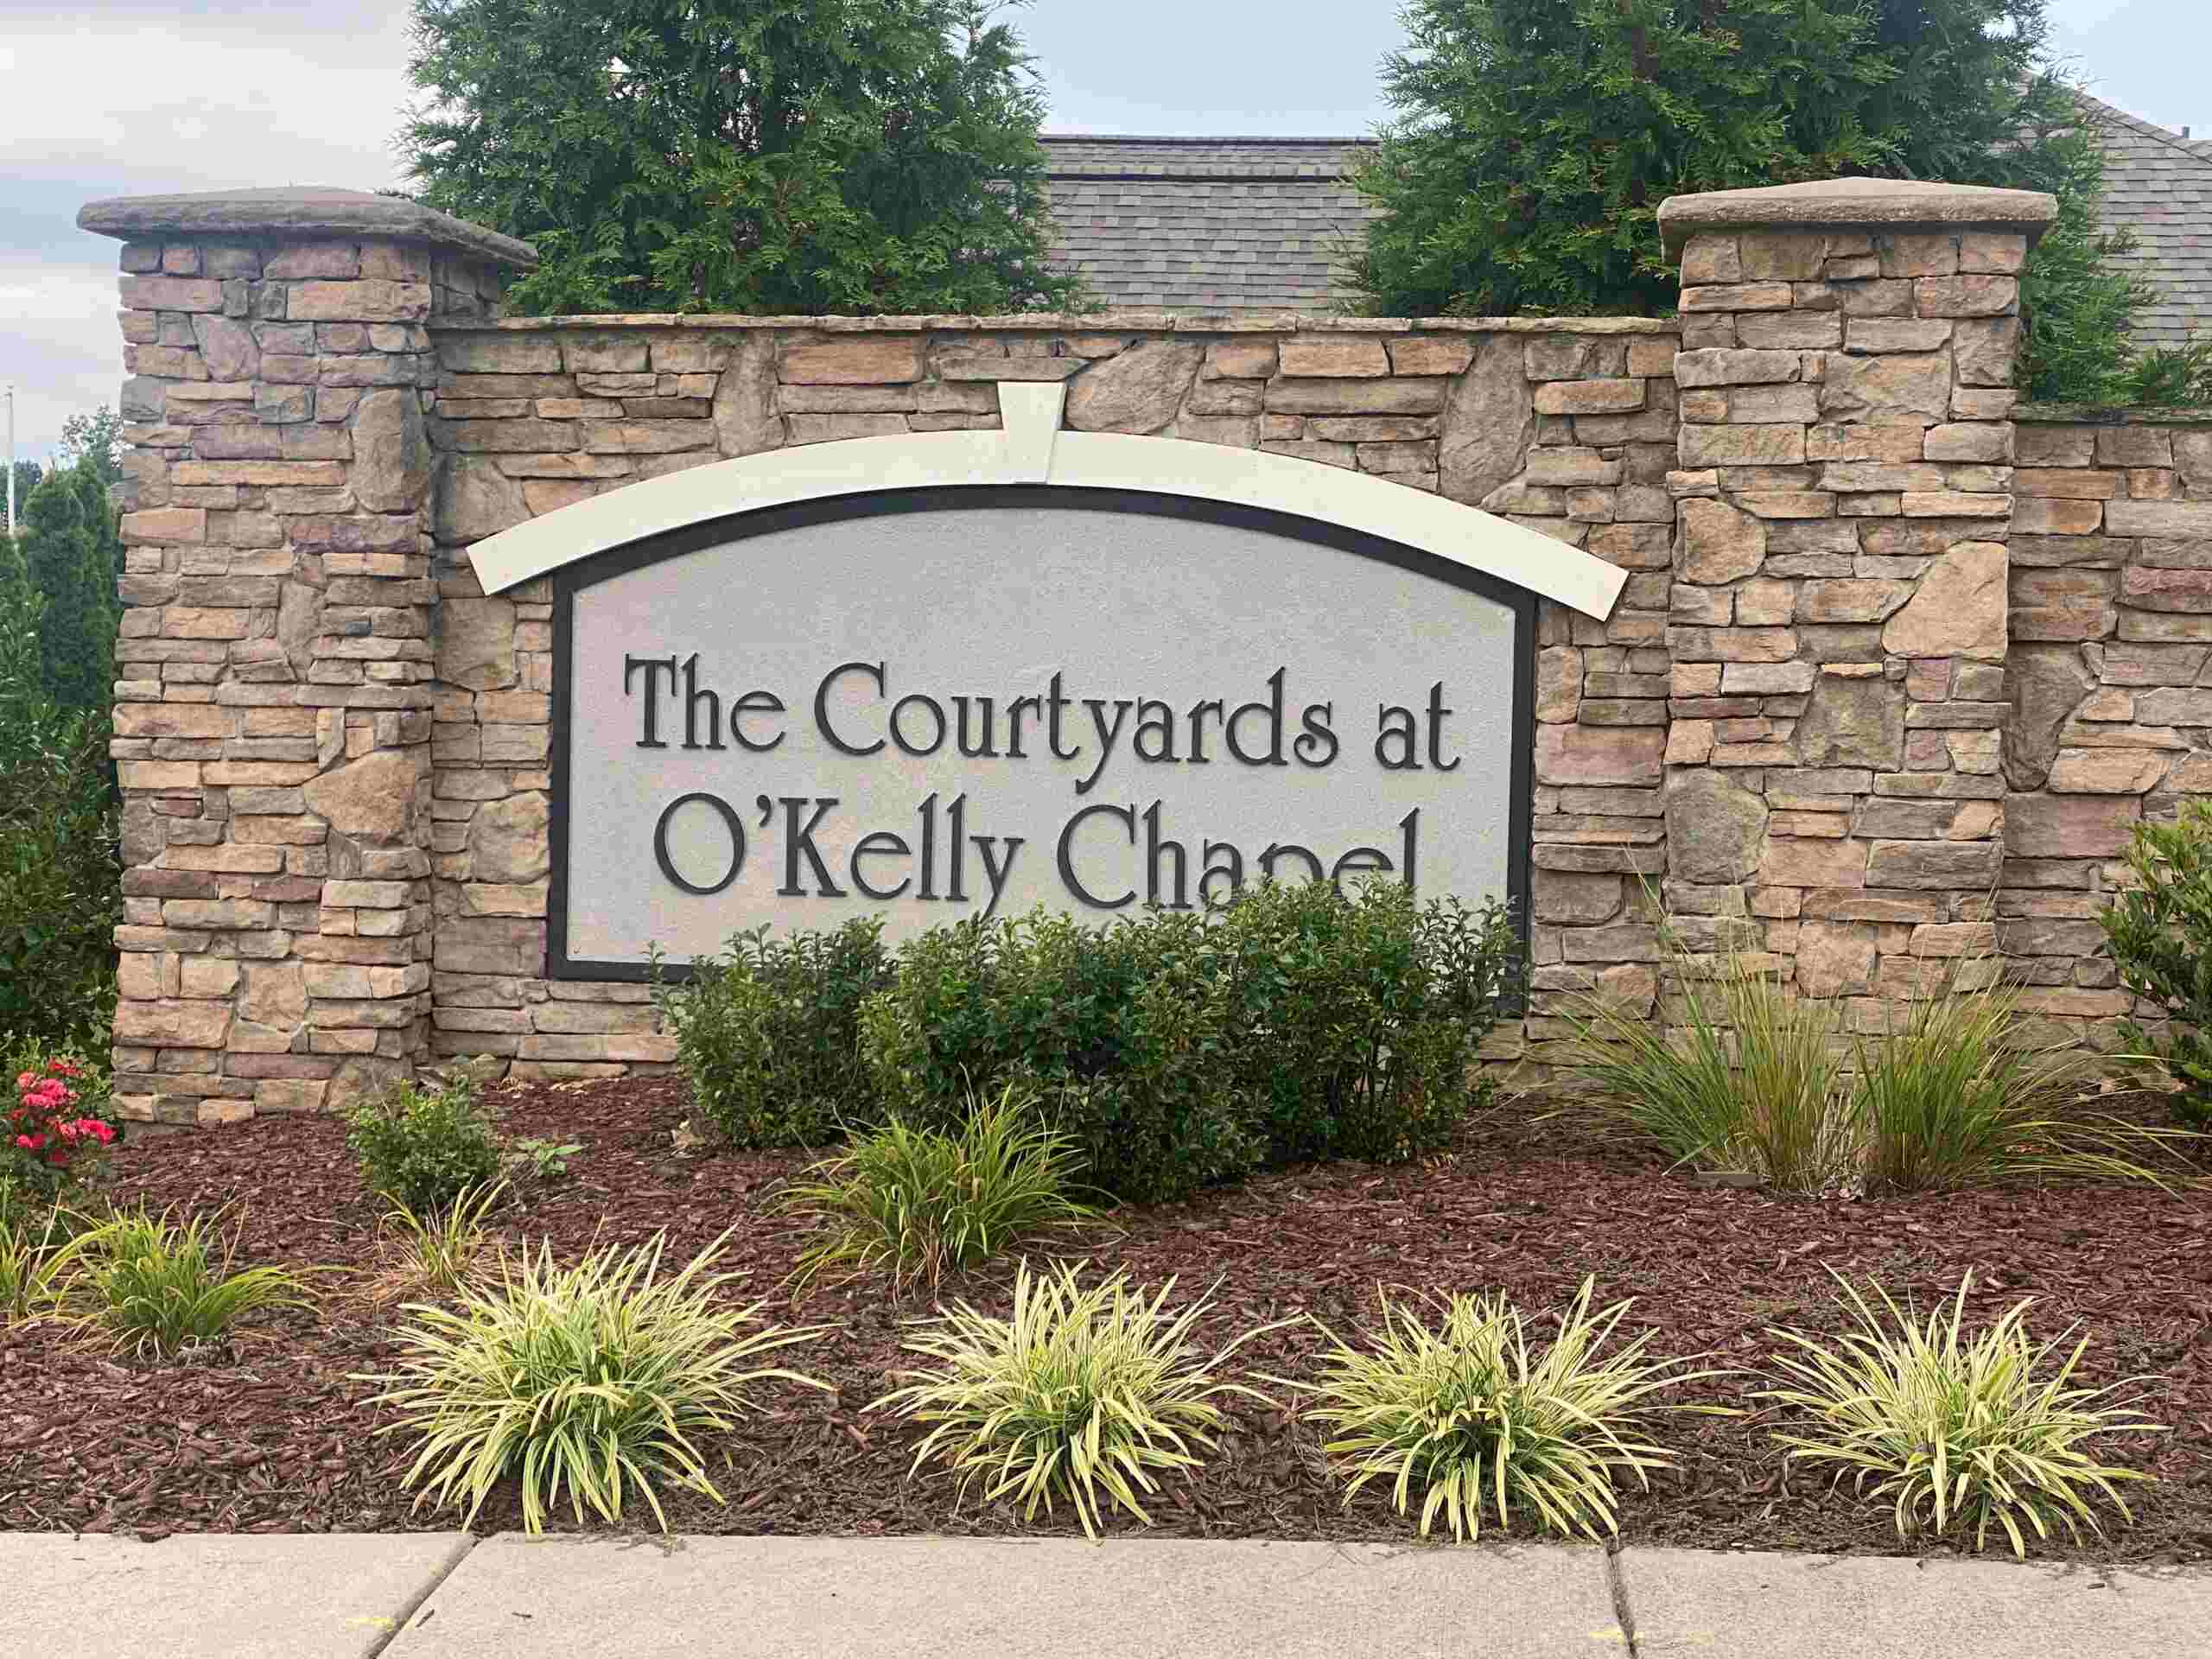 The Courtyards on O Kelly Chapel Name Board